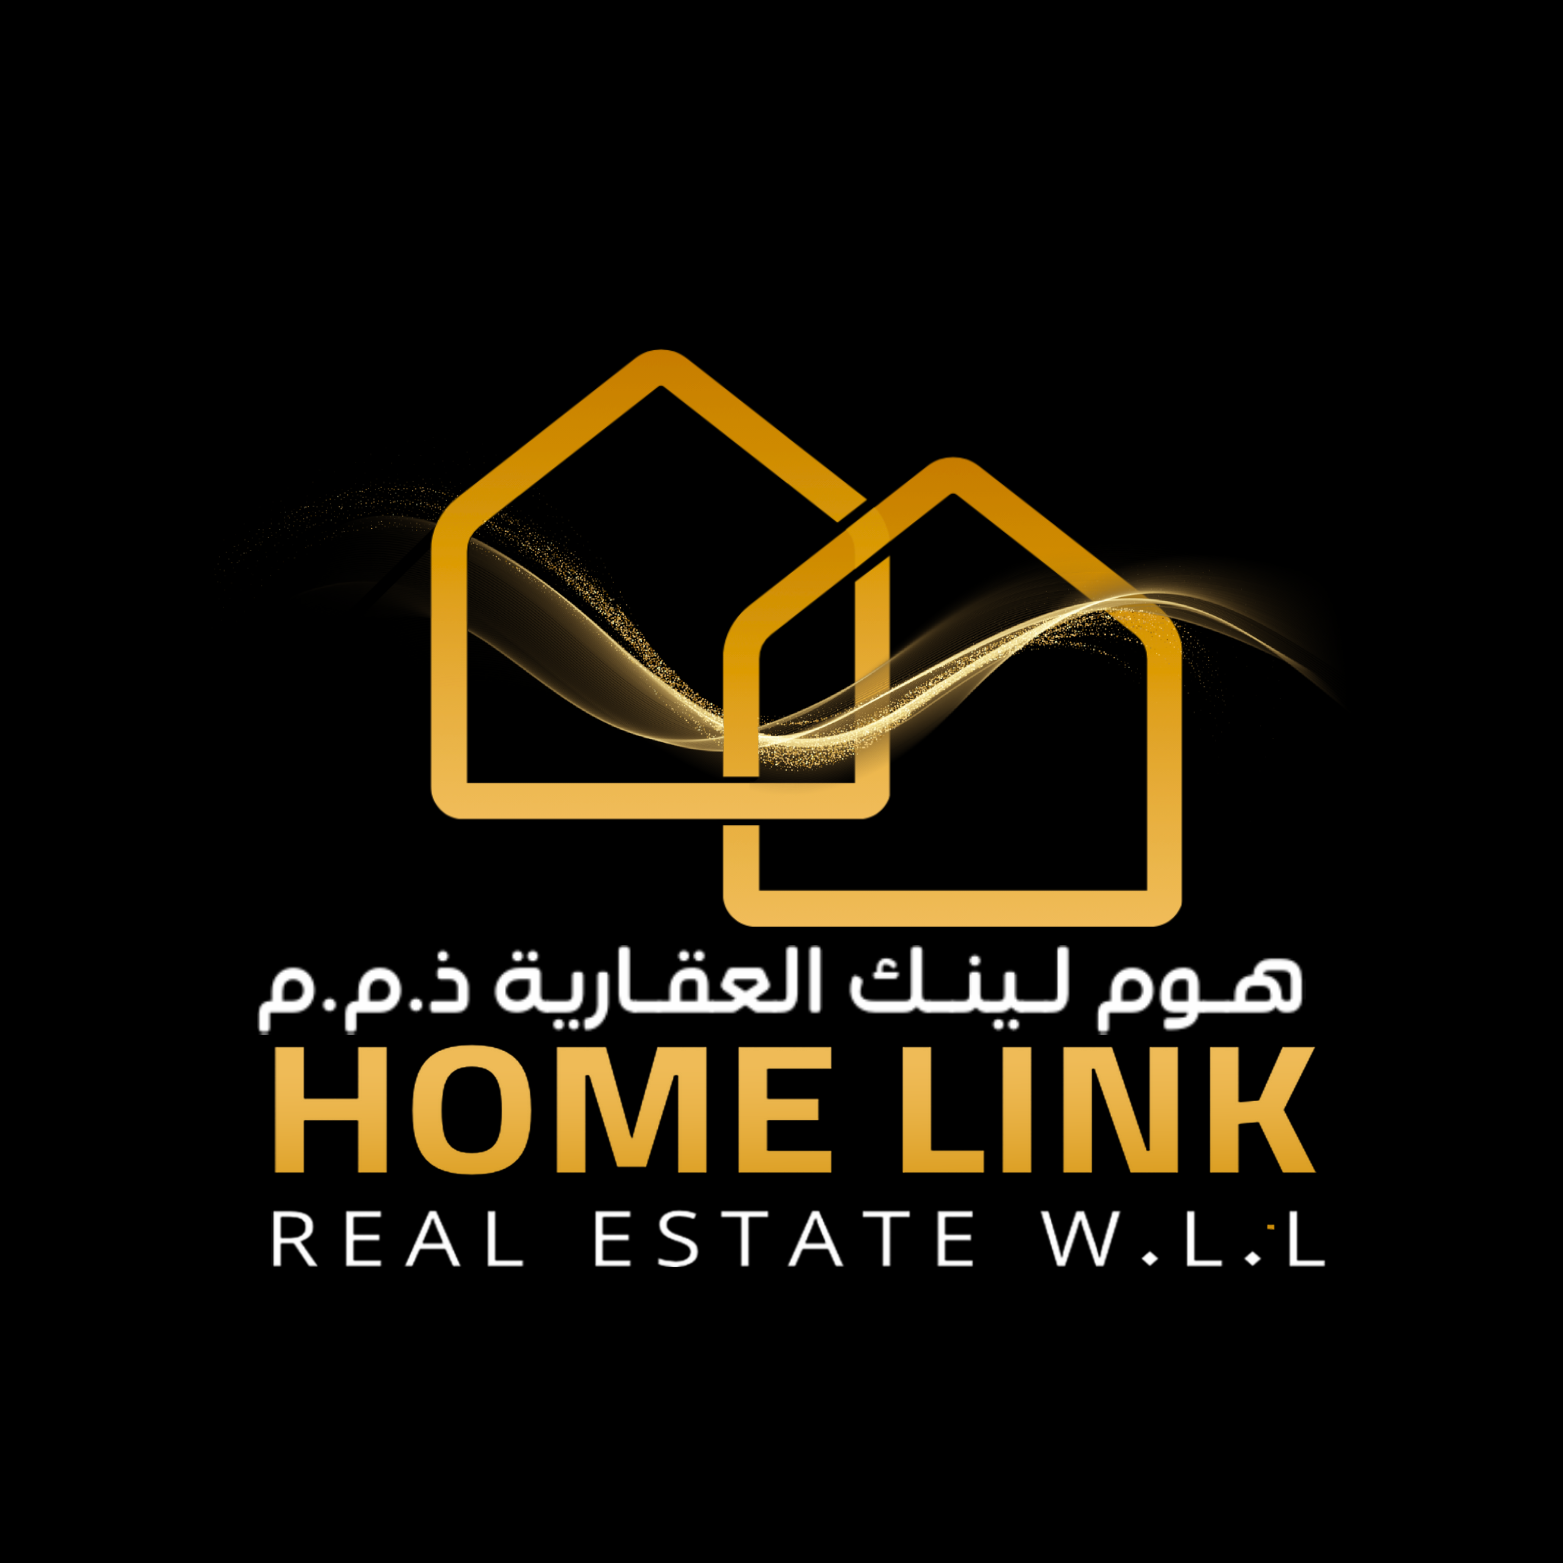 SS Home Link Real Estate W.L.L